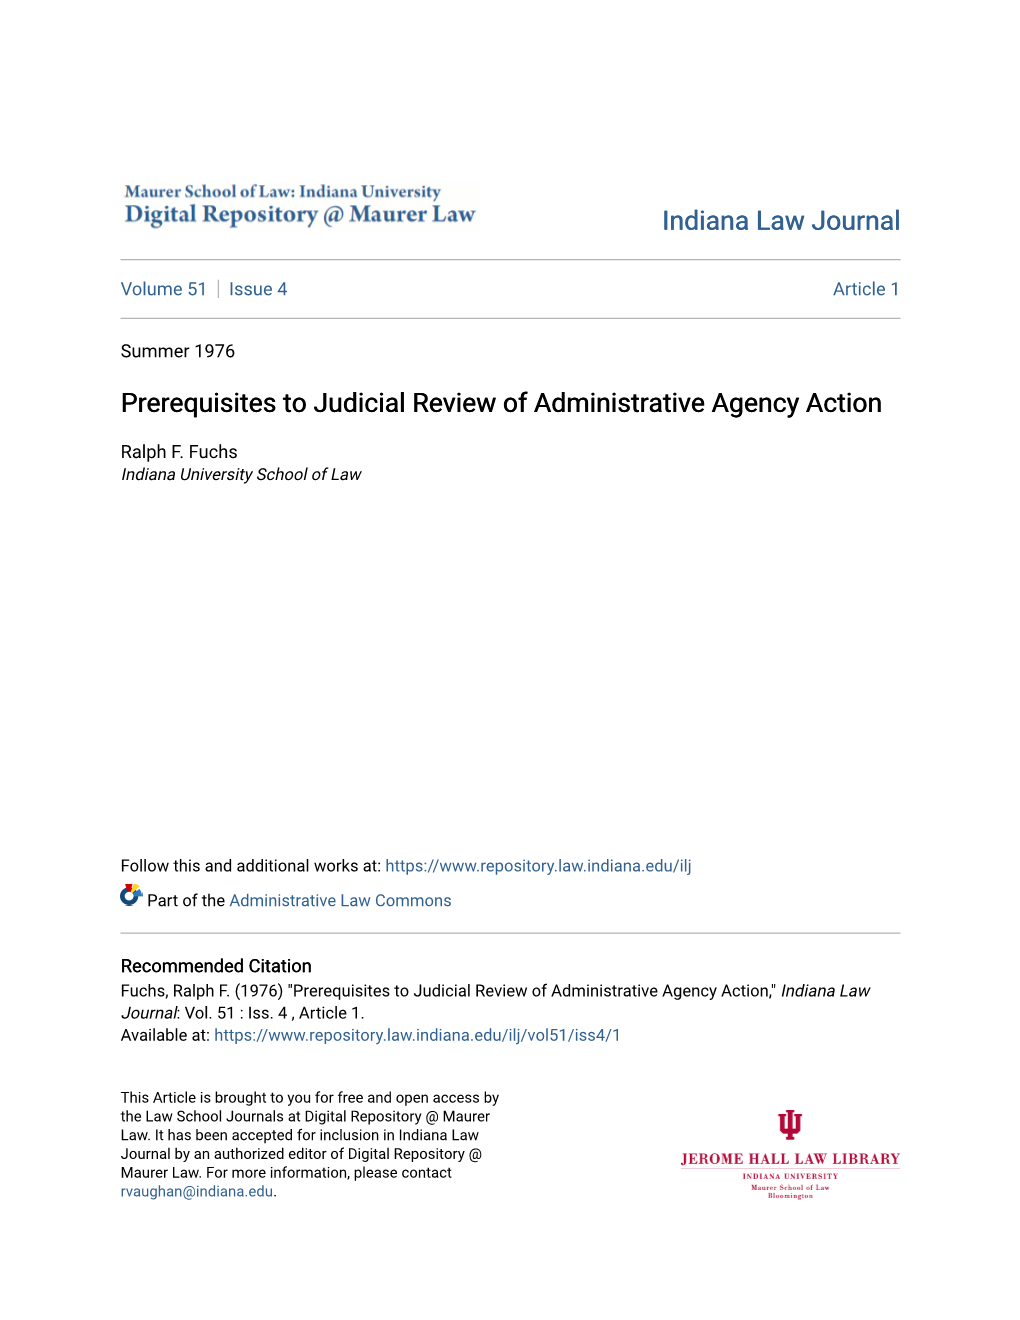 Prerequisites to Judicial Review of Administrative Agency Action